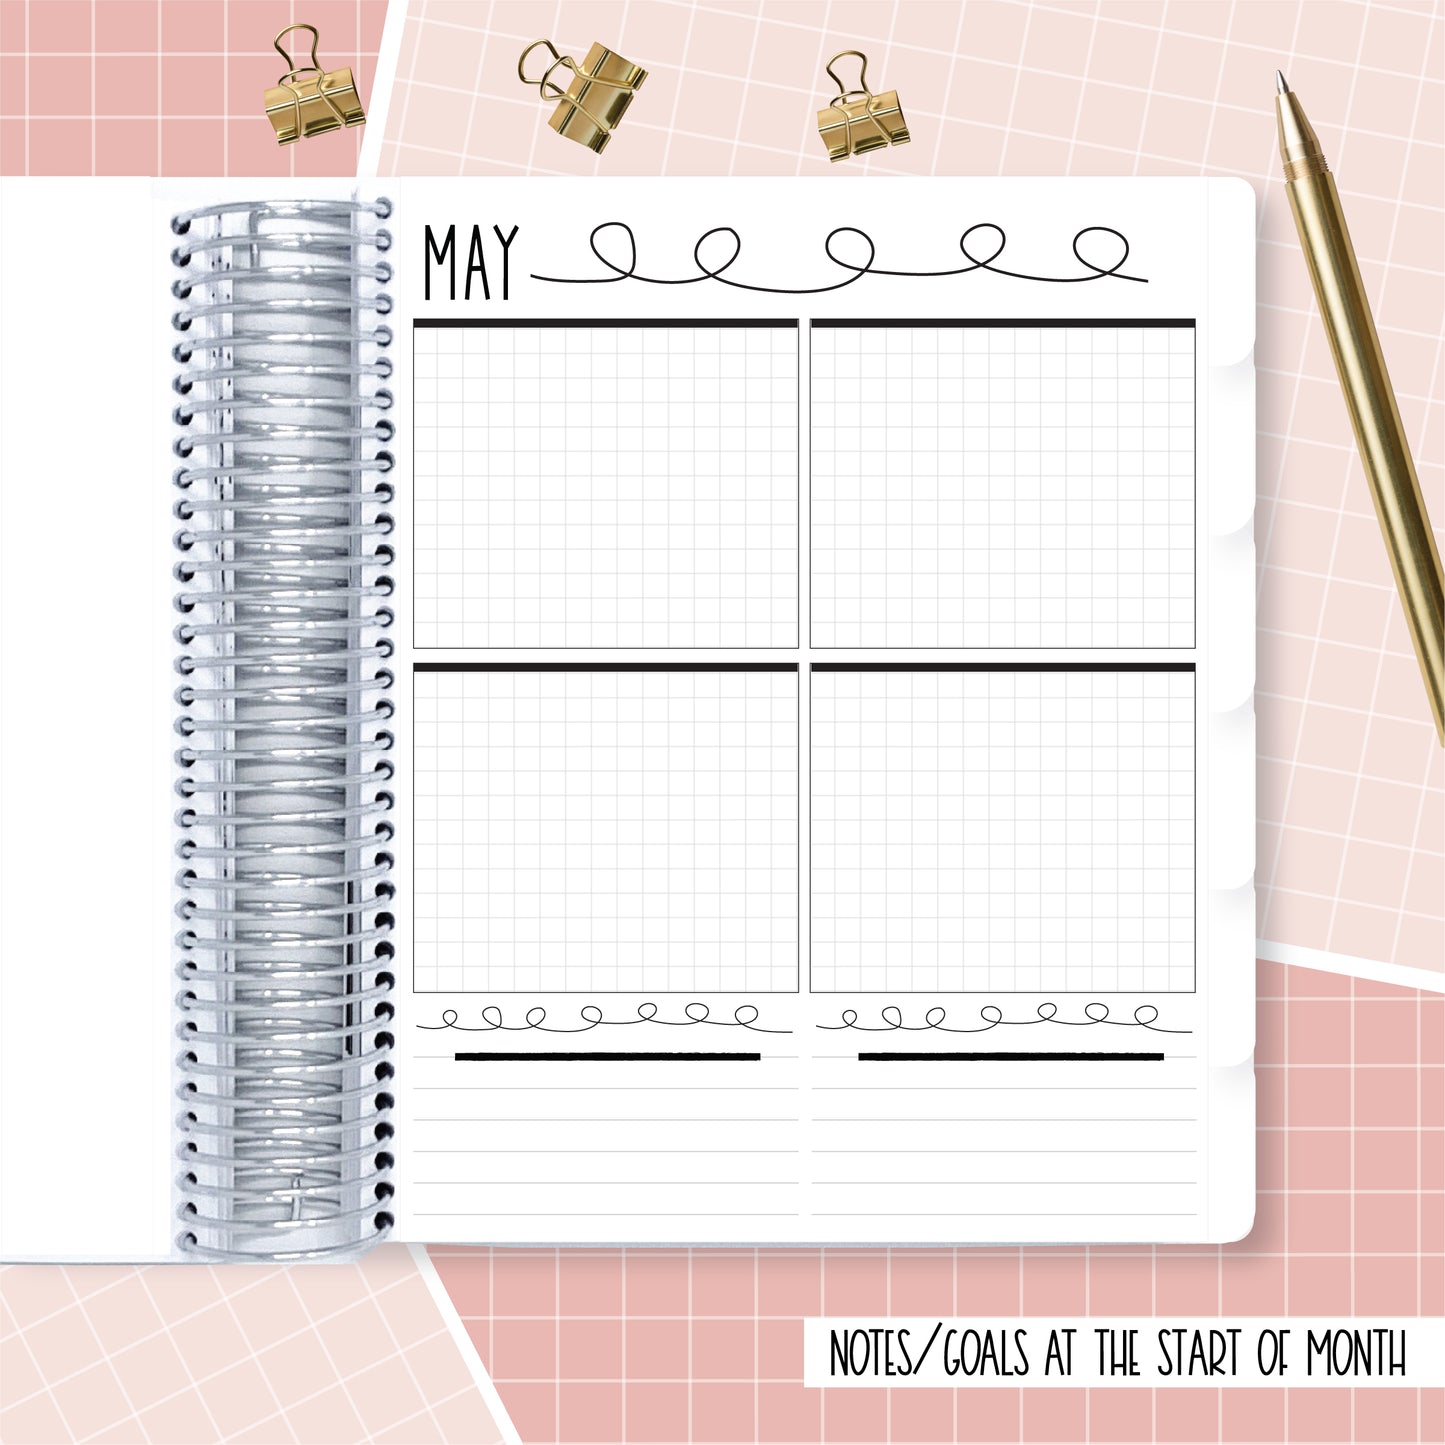 Retro Florals - A5W - Horizontal Weekly Planner